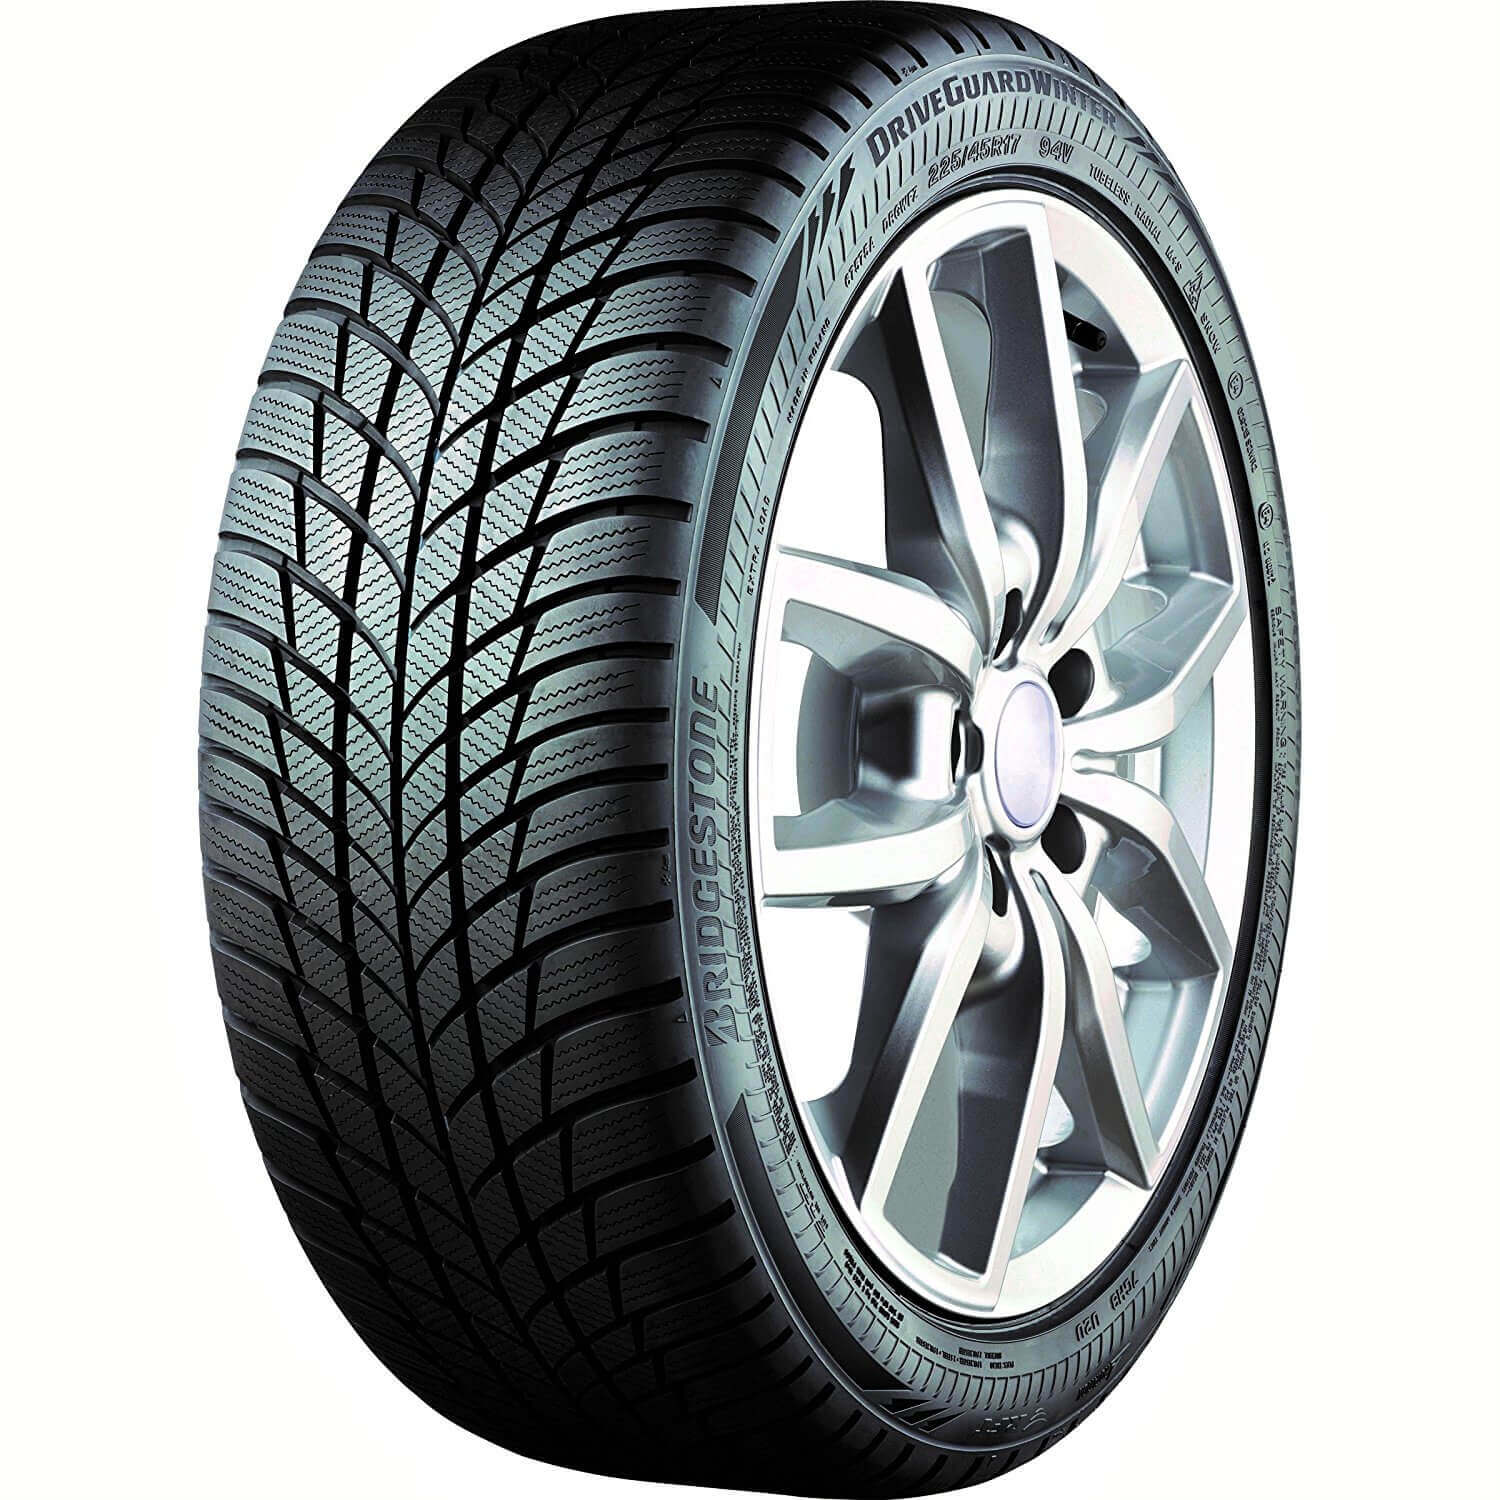 TURANZA 20 T001 Tyre